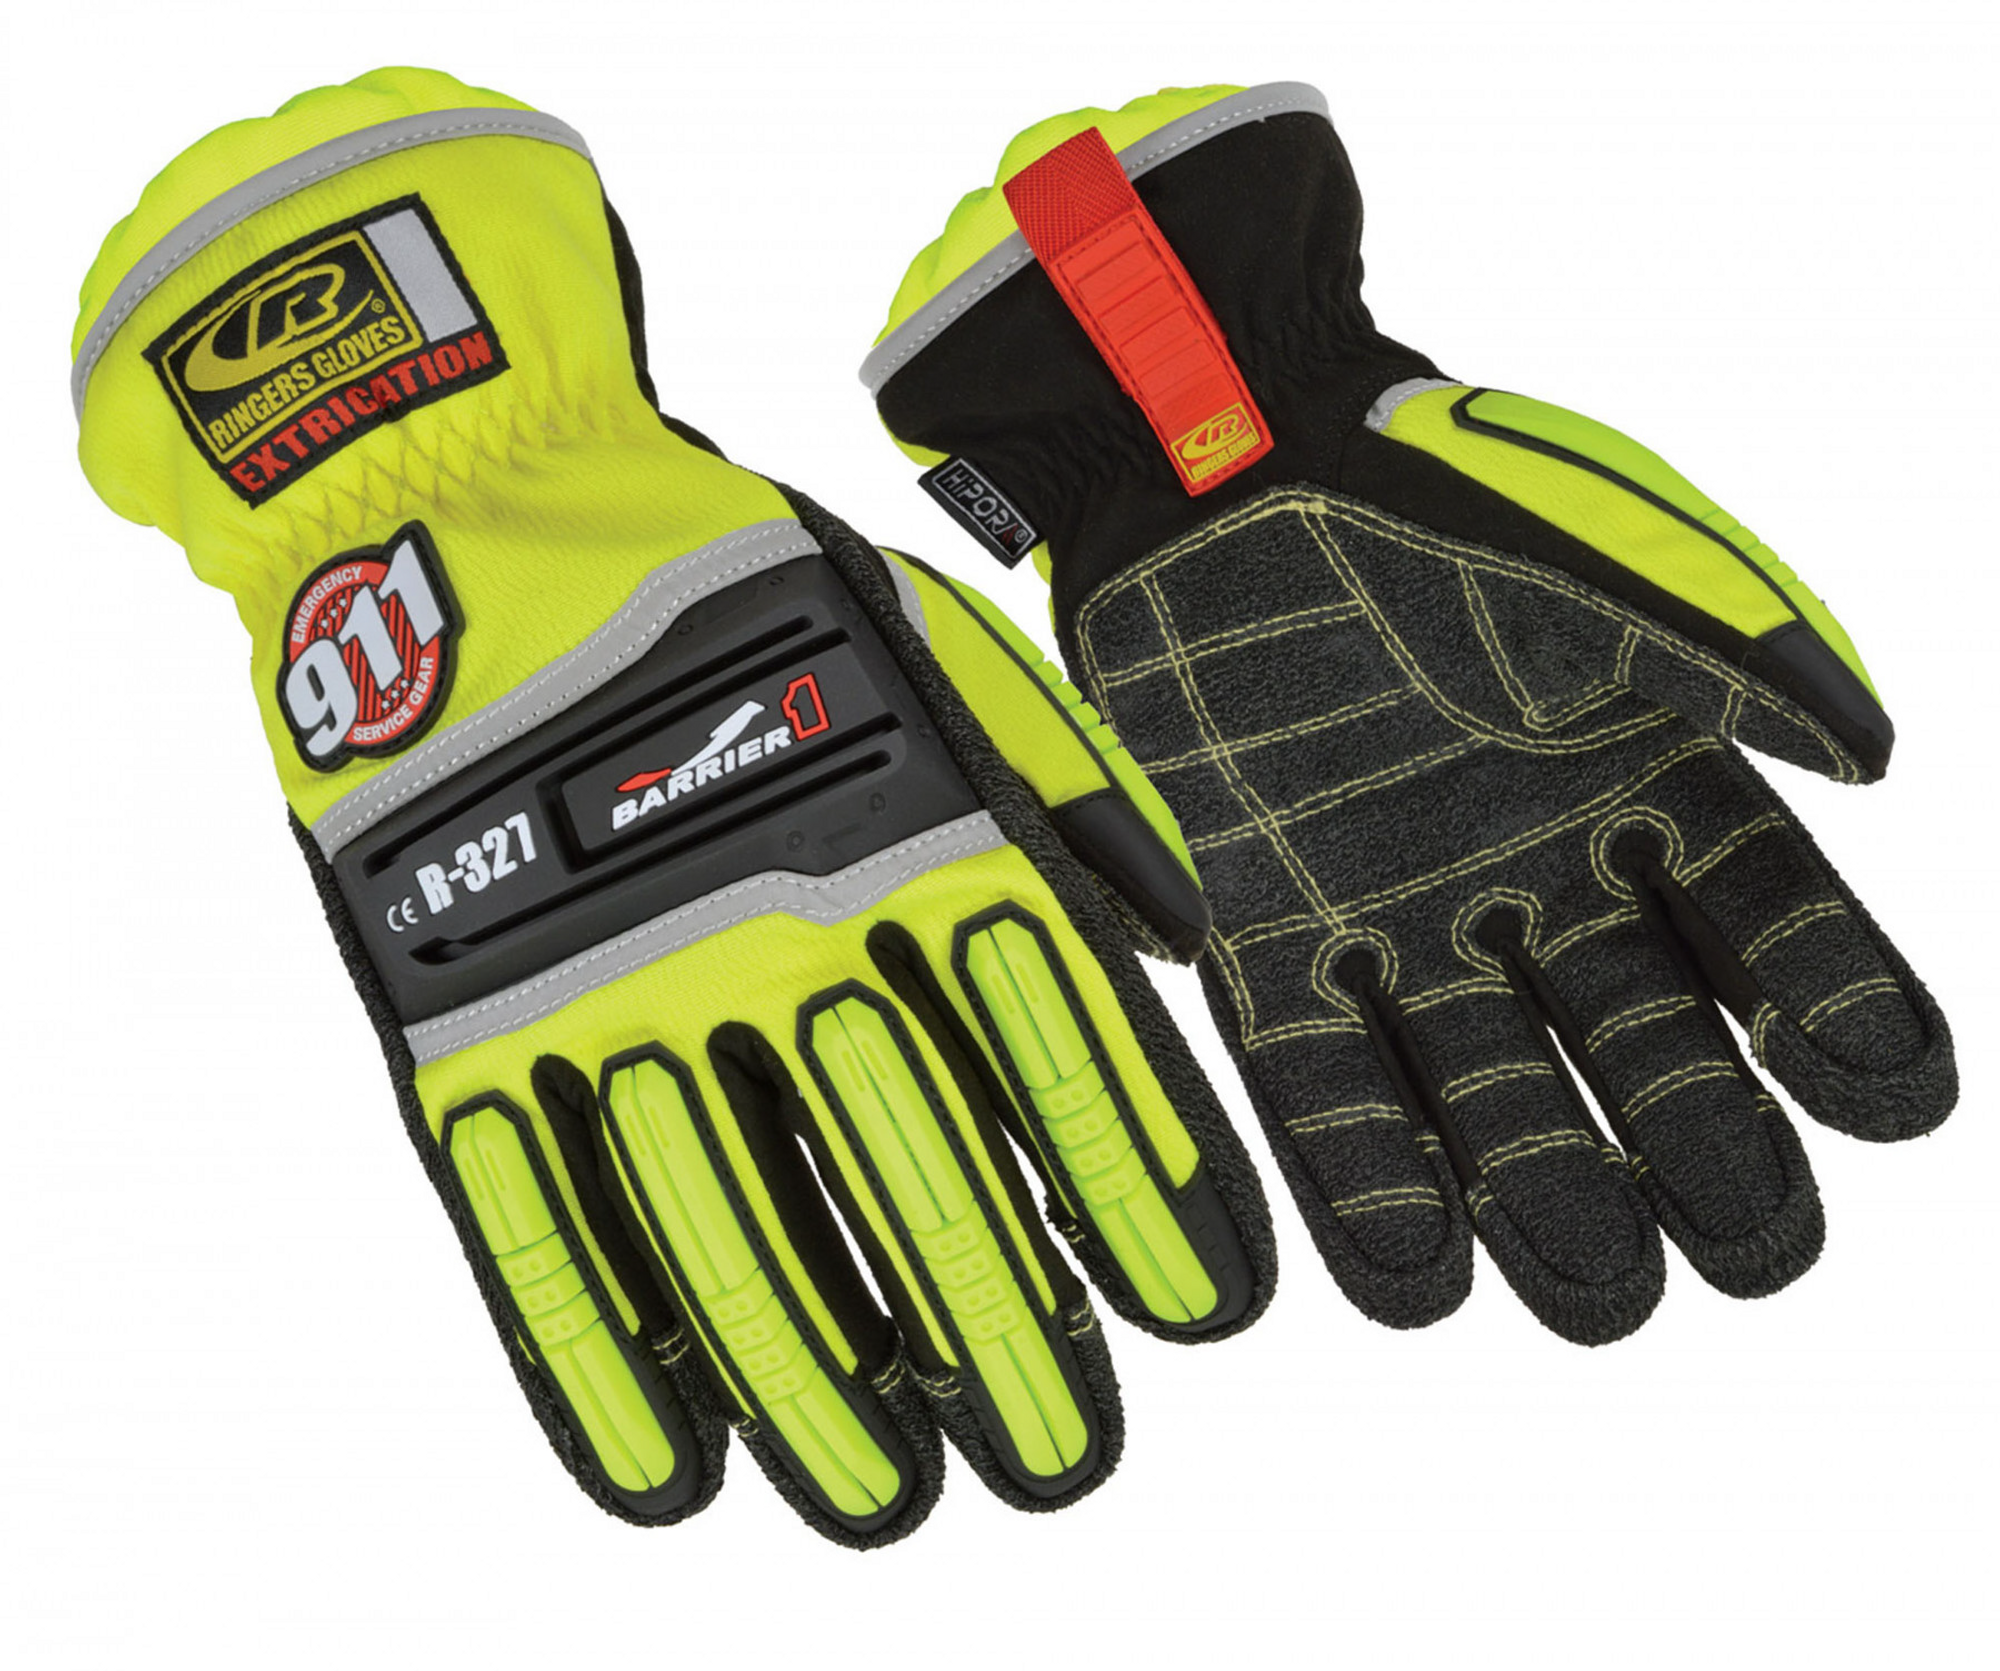 Extrication Barrier One Glove - KRRG-327-11